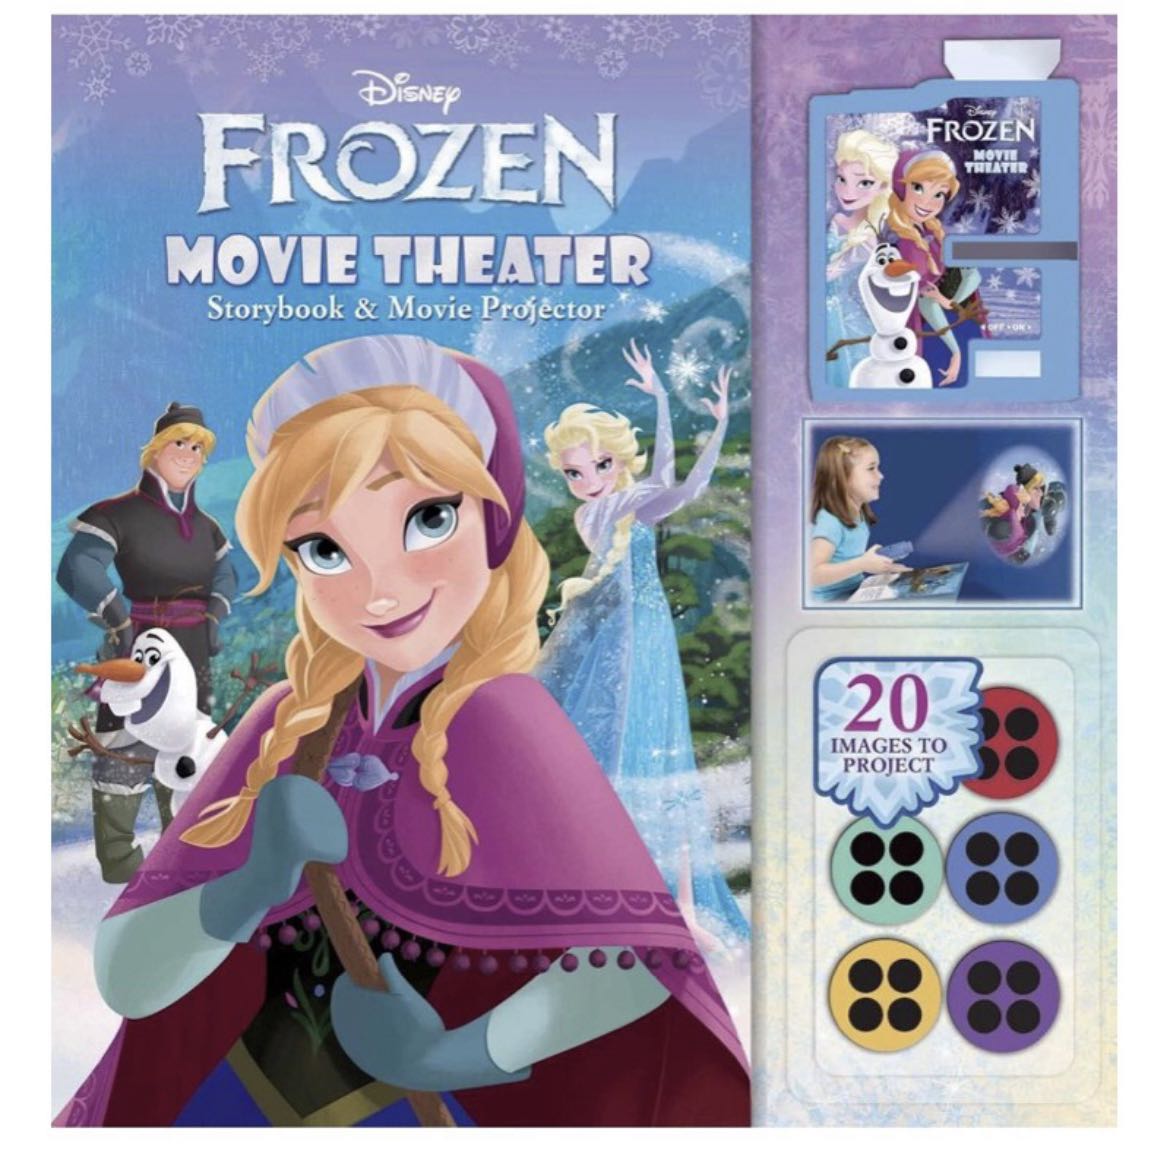 Hobbies　on　Storybook　Non-Fiction　Movie　story　and　and　Books　with　Theatre　Carousell　projector),　Fiction　come　Movie　Disney　Magazines,　Frozen　Toys,